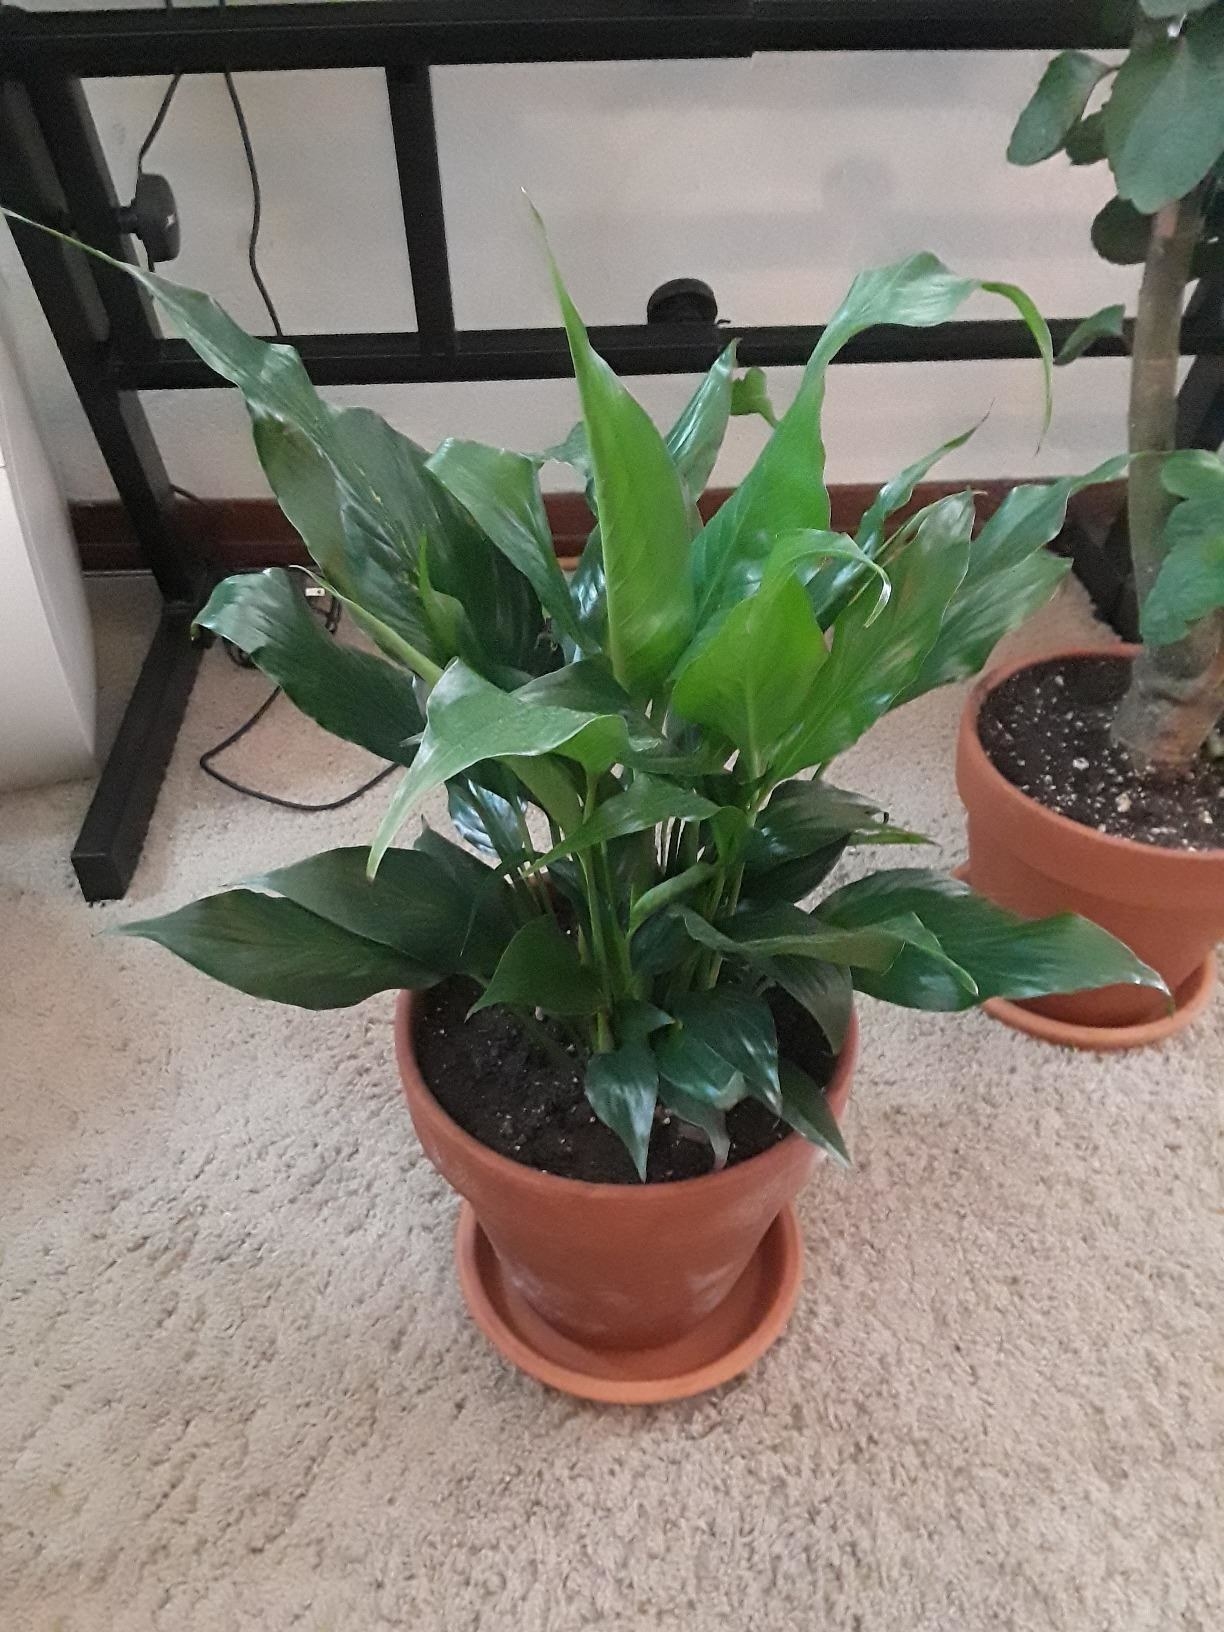 A reviewer showing their plant with large rubbery-looking leaves